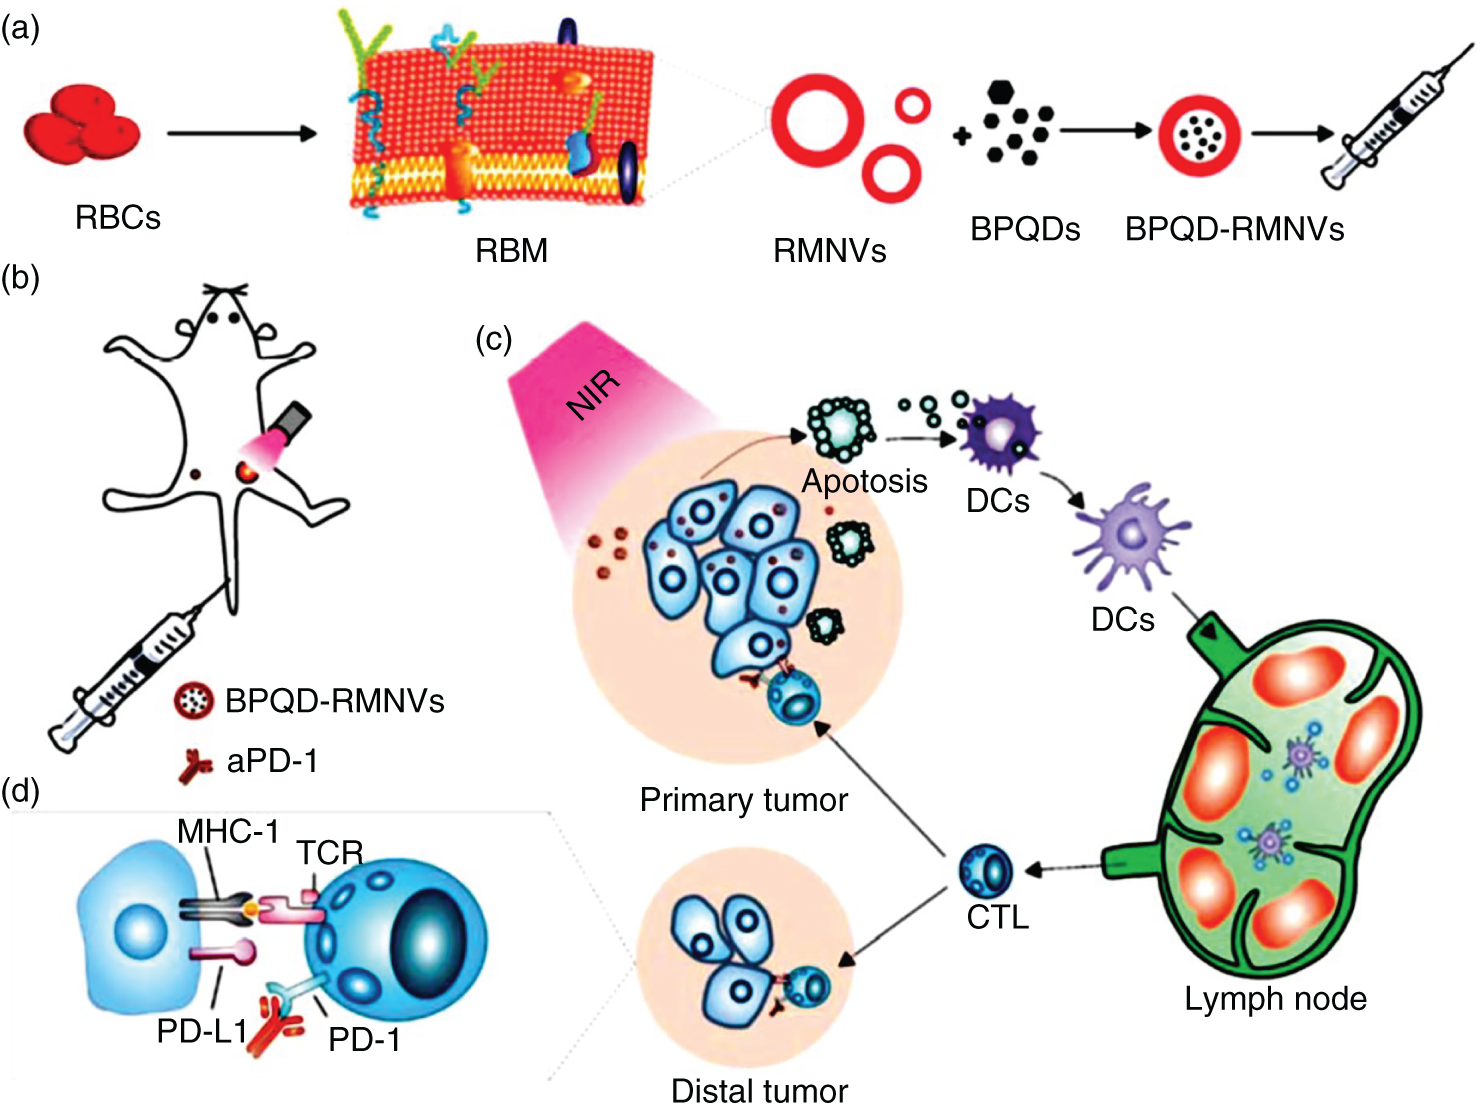 Schematic representation of combination therapy of PTT-ImT mediated by BPQD-RMNVs and aPD-1. (a) Extrusion synthesis of BPQD-RMNVs (b) aPD-1 and PTT treatment of mice tumor model with BPQD-RMNVs. (c) Tumor antigen release and in situ generation of tumor cell apoptosis. (d) Role of aPD-1 for protecting tumor infiltrating CD8+ T cells.